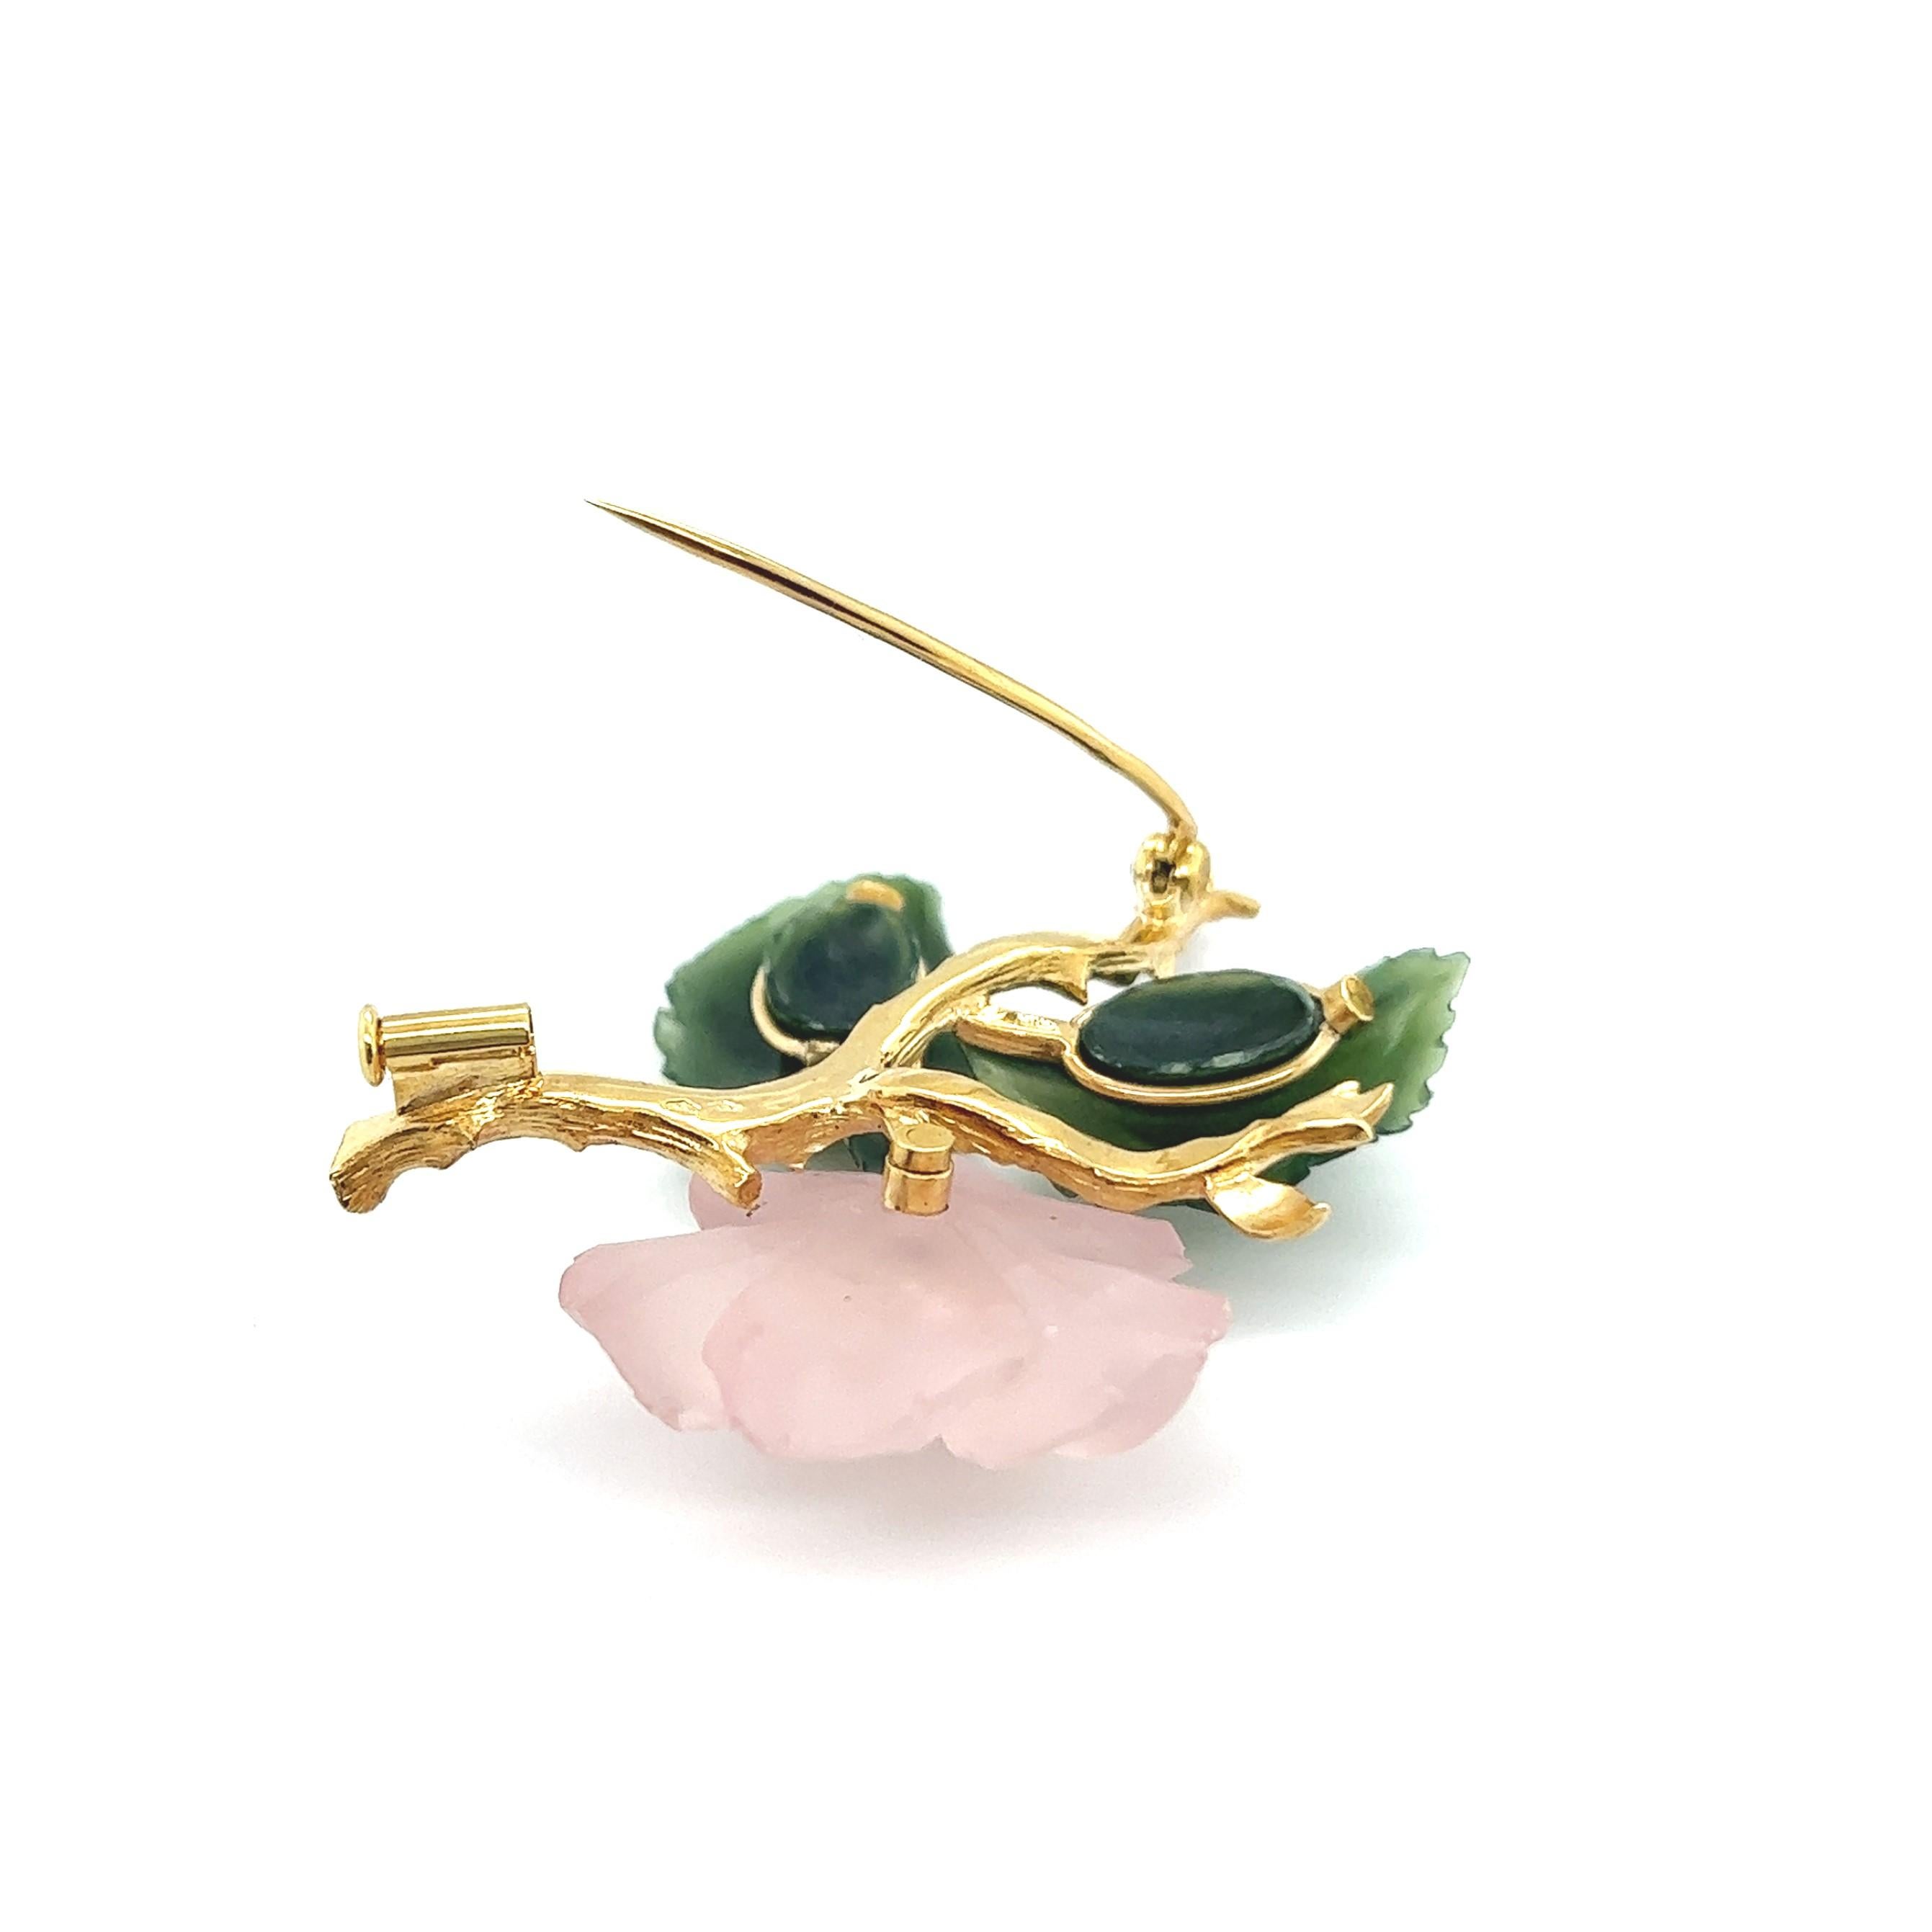 Brooch with Rose Quartz & Nephrite in 18 Karat Yellow Gold by Paltscho For Sale 3